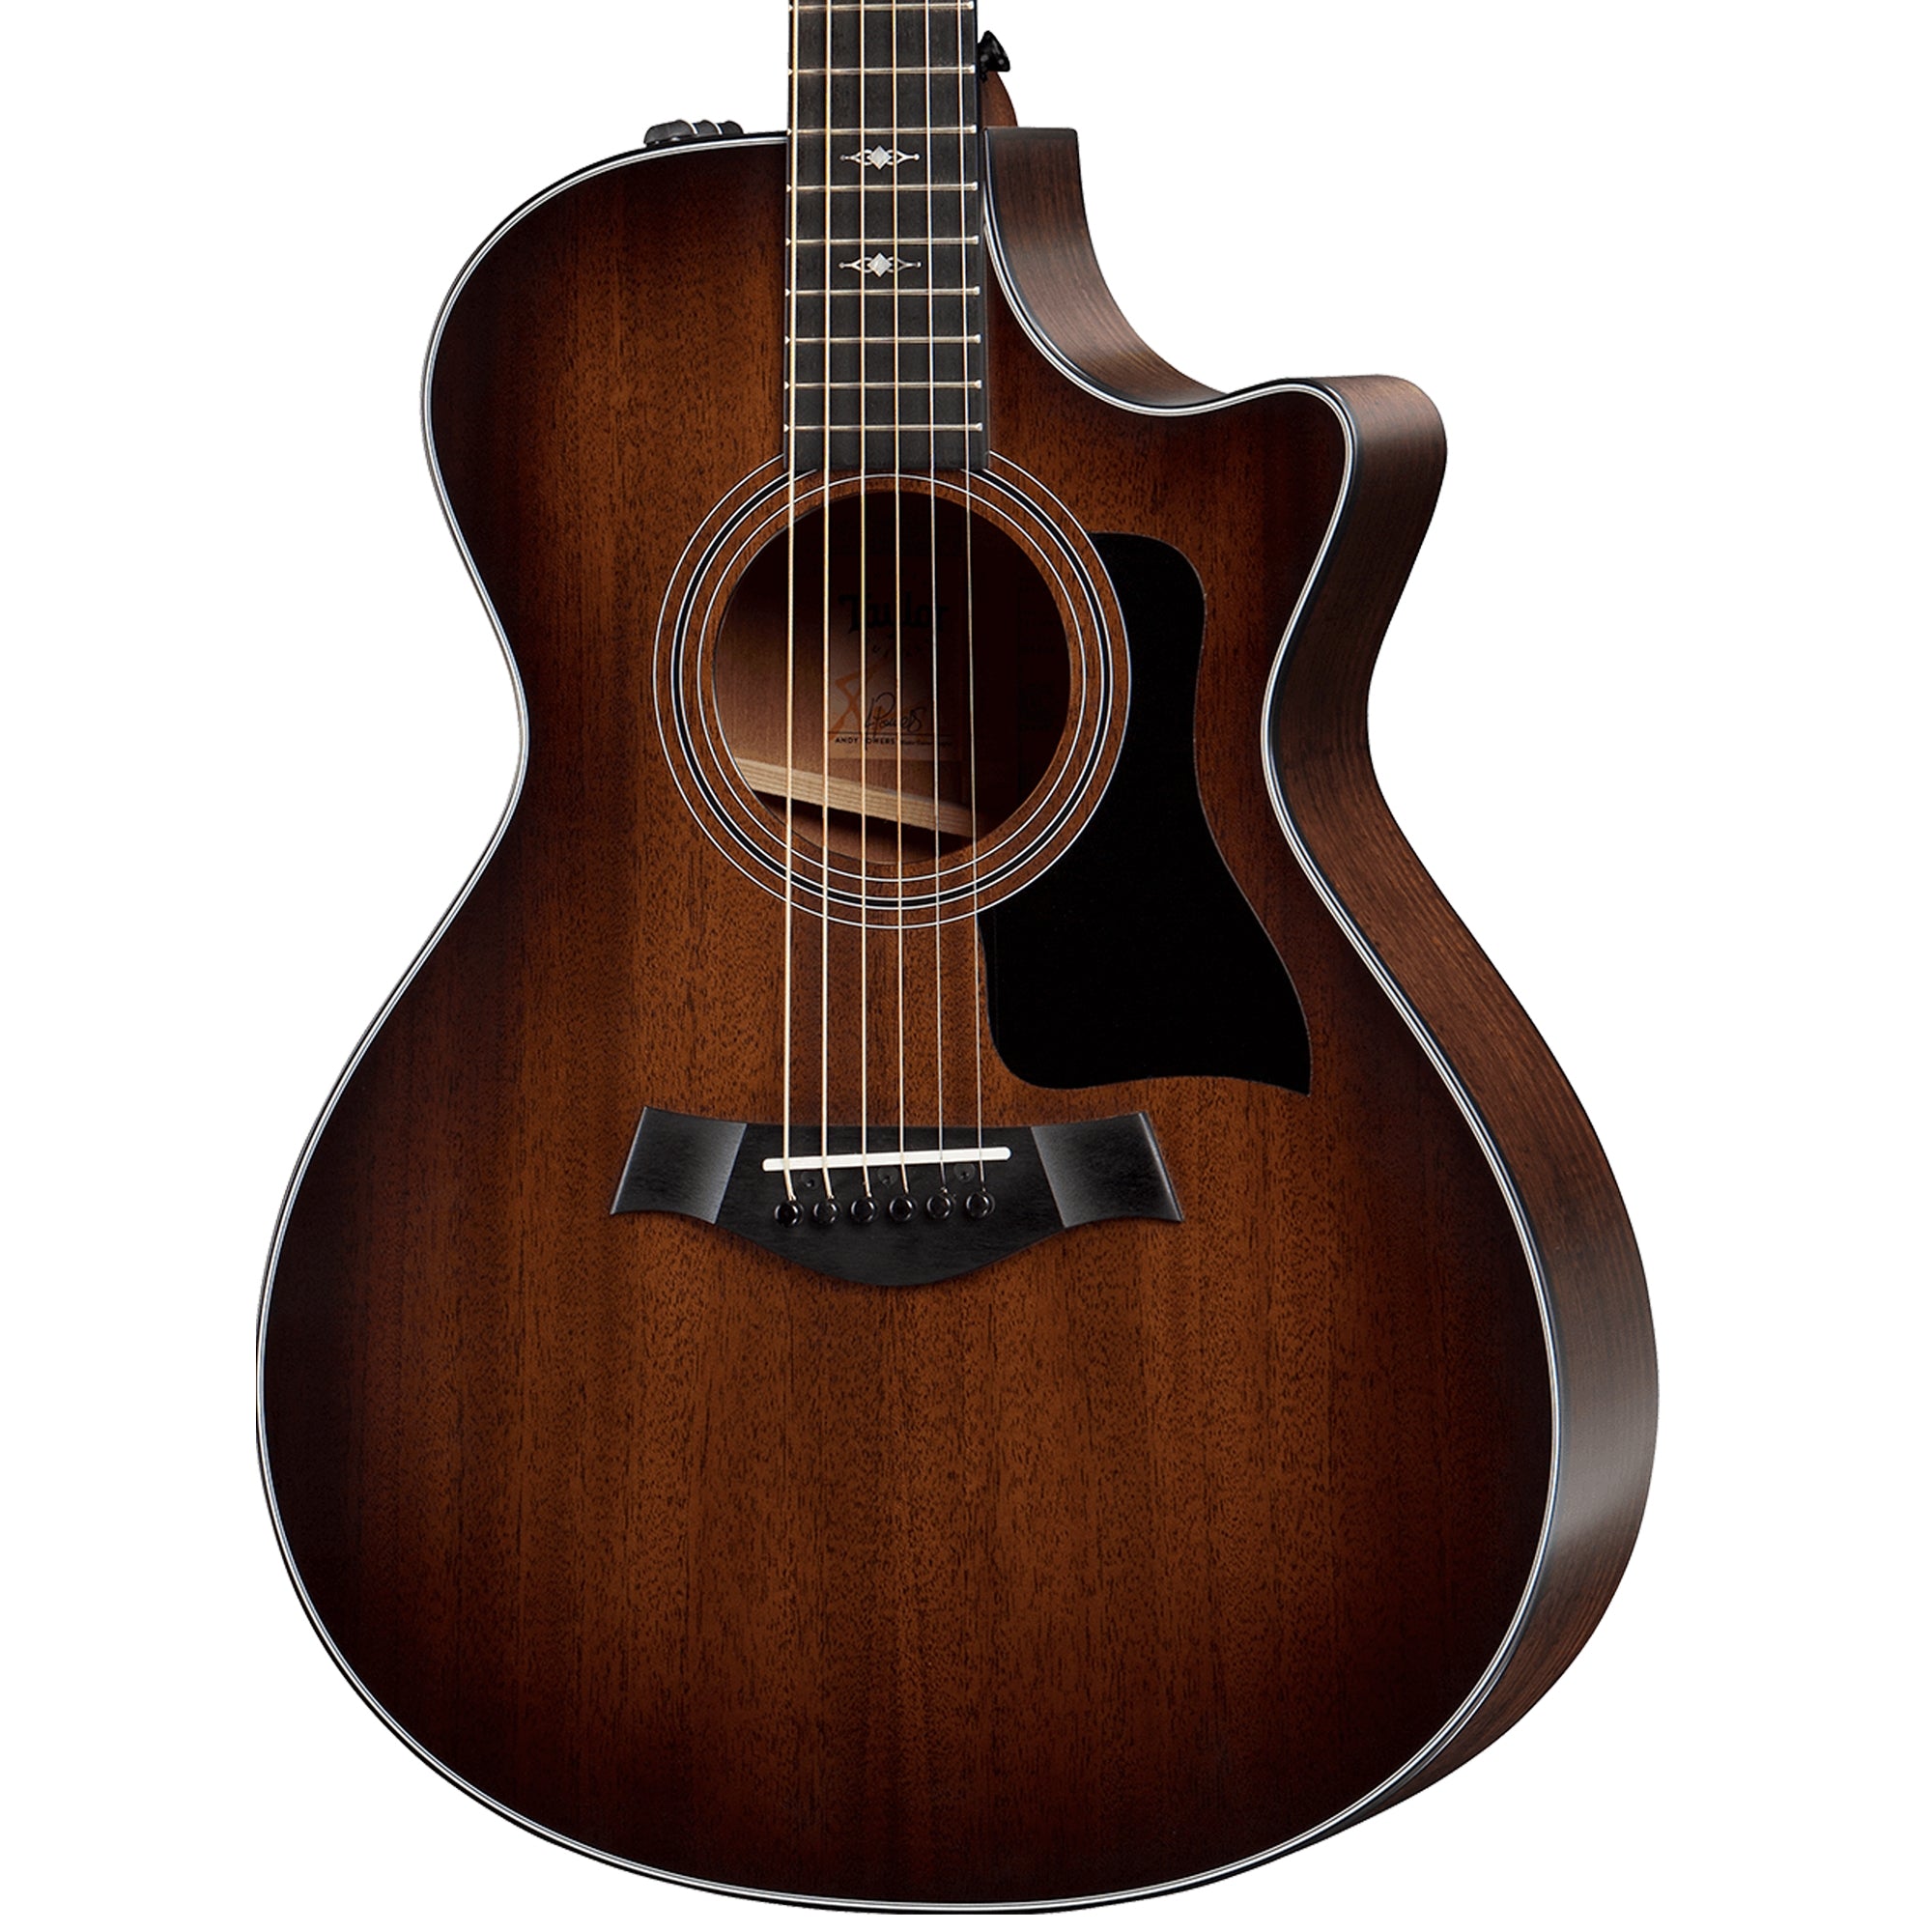 Taylor 322ce V Class Grand Concert Shaded Edgeburst Acoustic